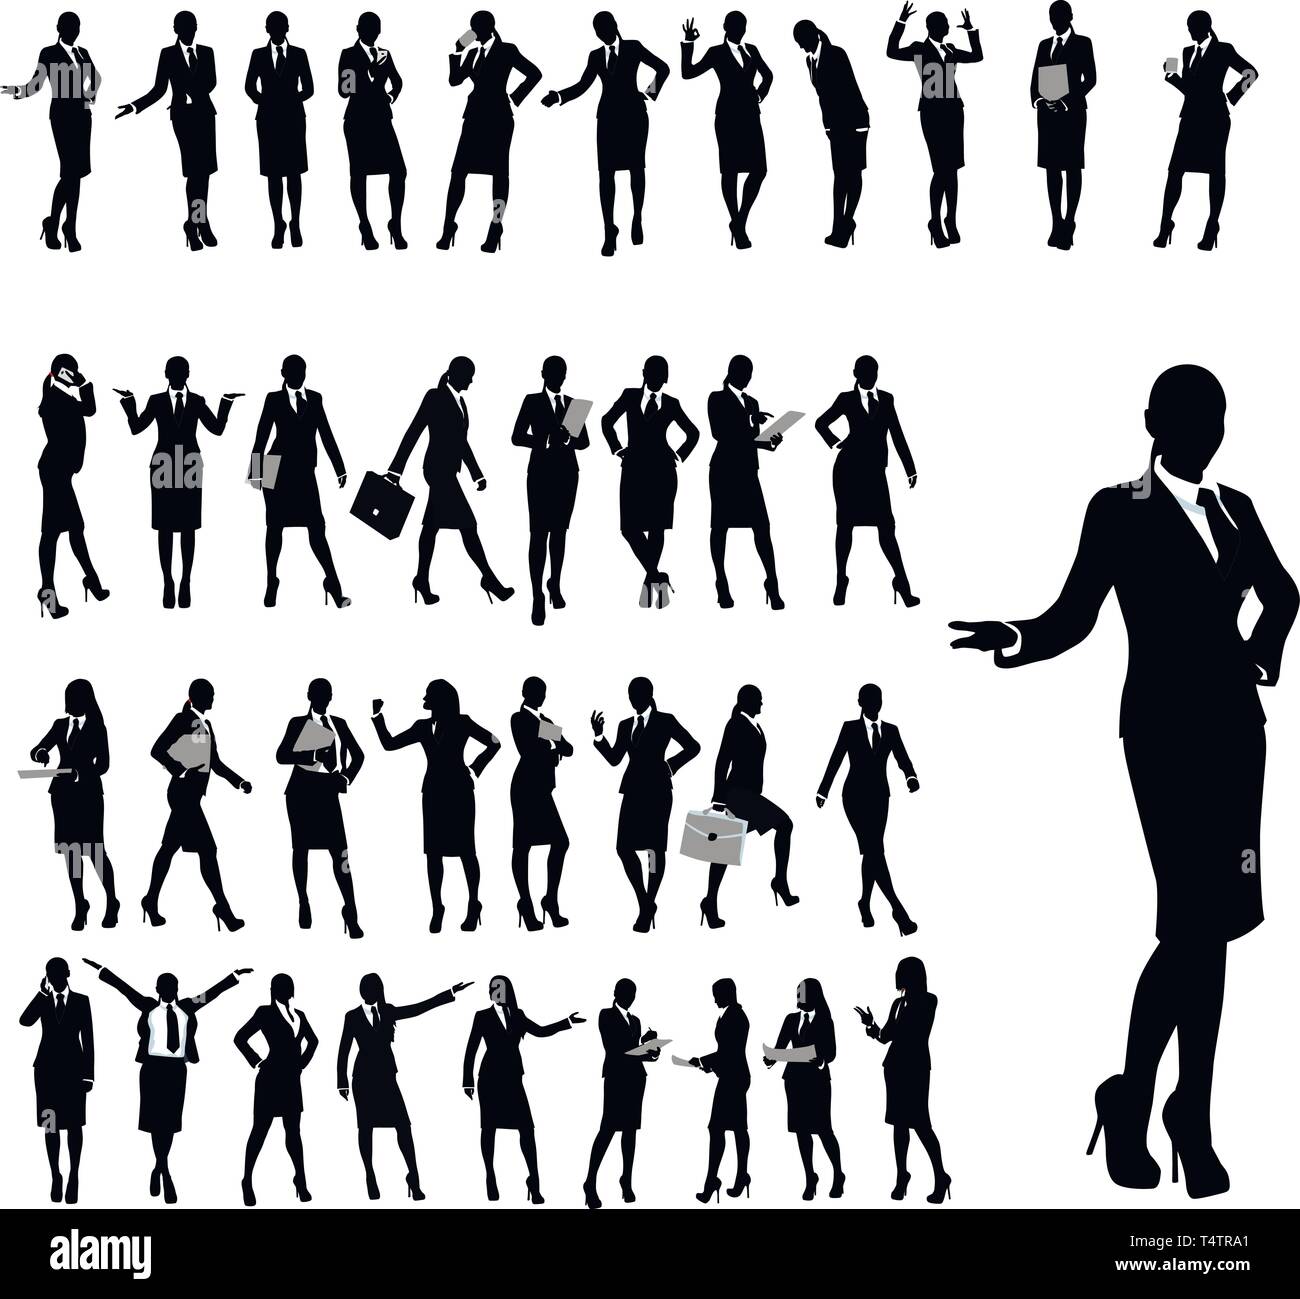 Female Worker Silhouette Vector Stock Photos & Female Worker Silhouette ...